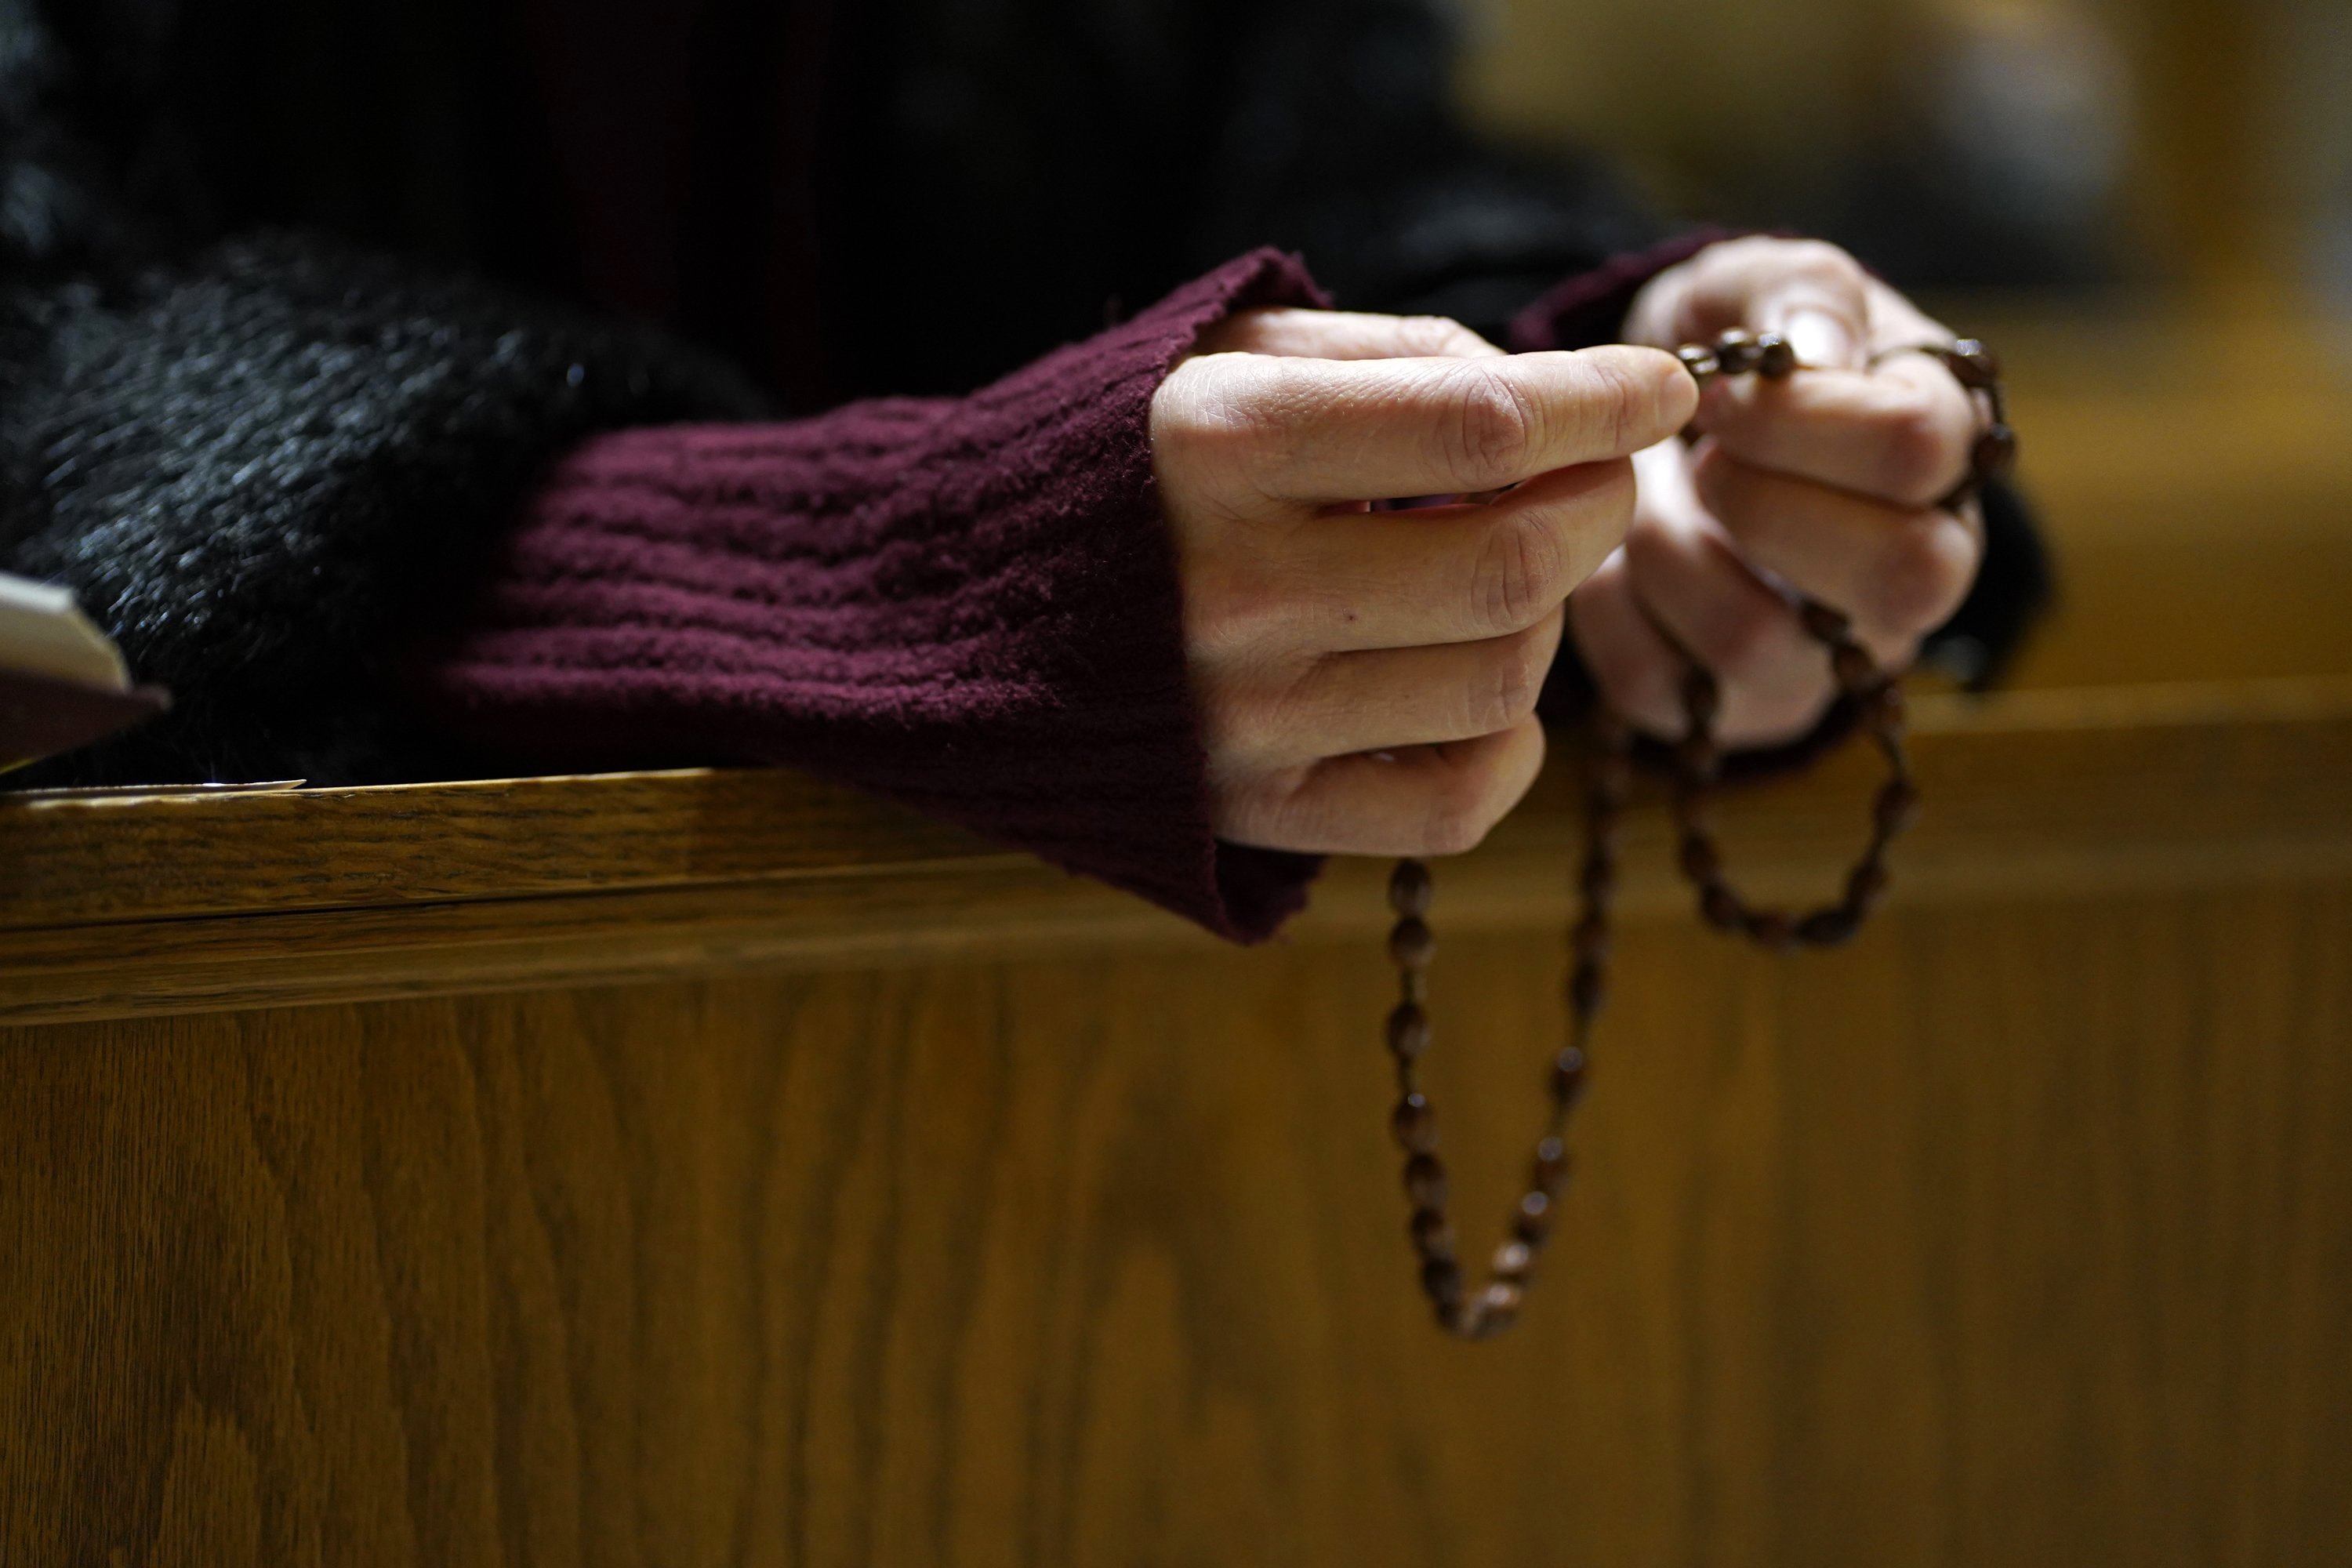 A woman prays the rosary following an evening prayer service at St. George Ukrainian Catholic Church in New York City Jan. 26, 2022. (CNS photo/Gregory A. Shemitz)